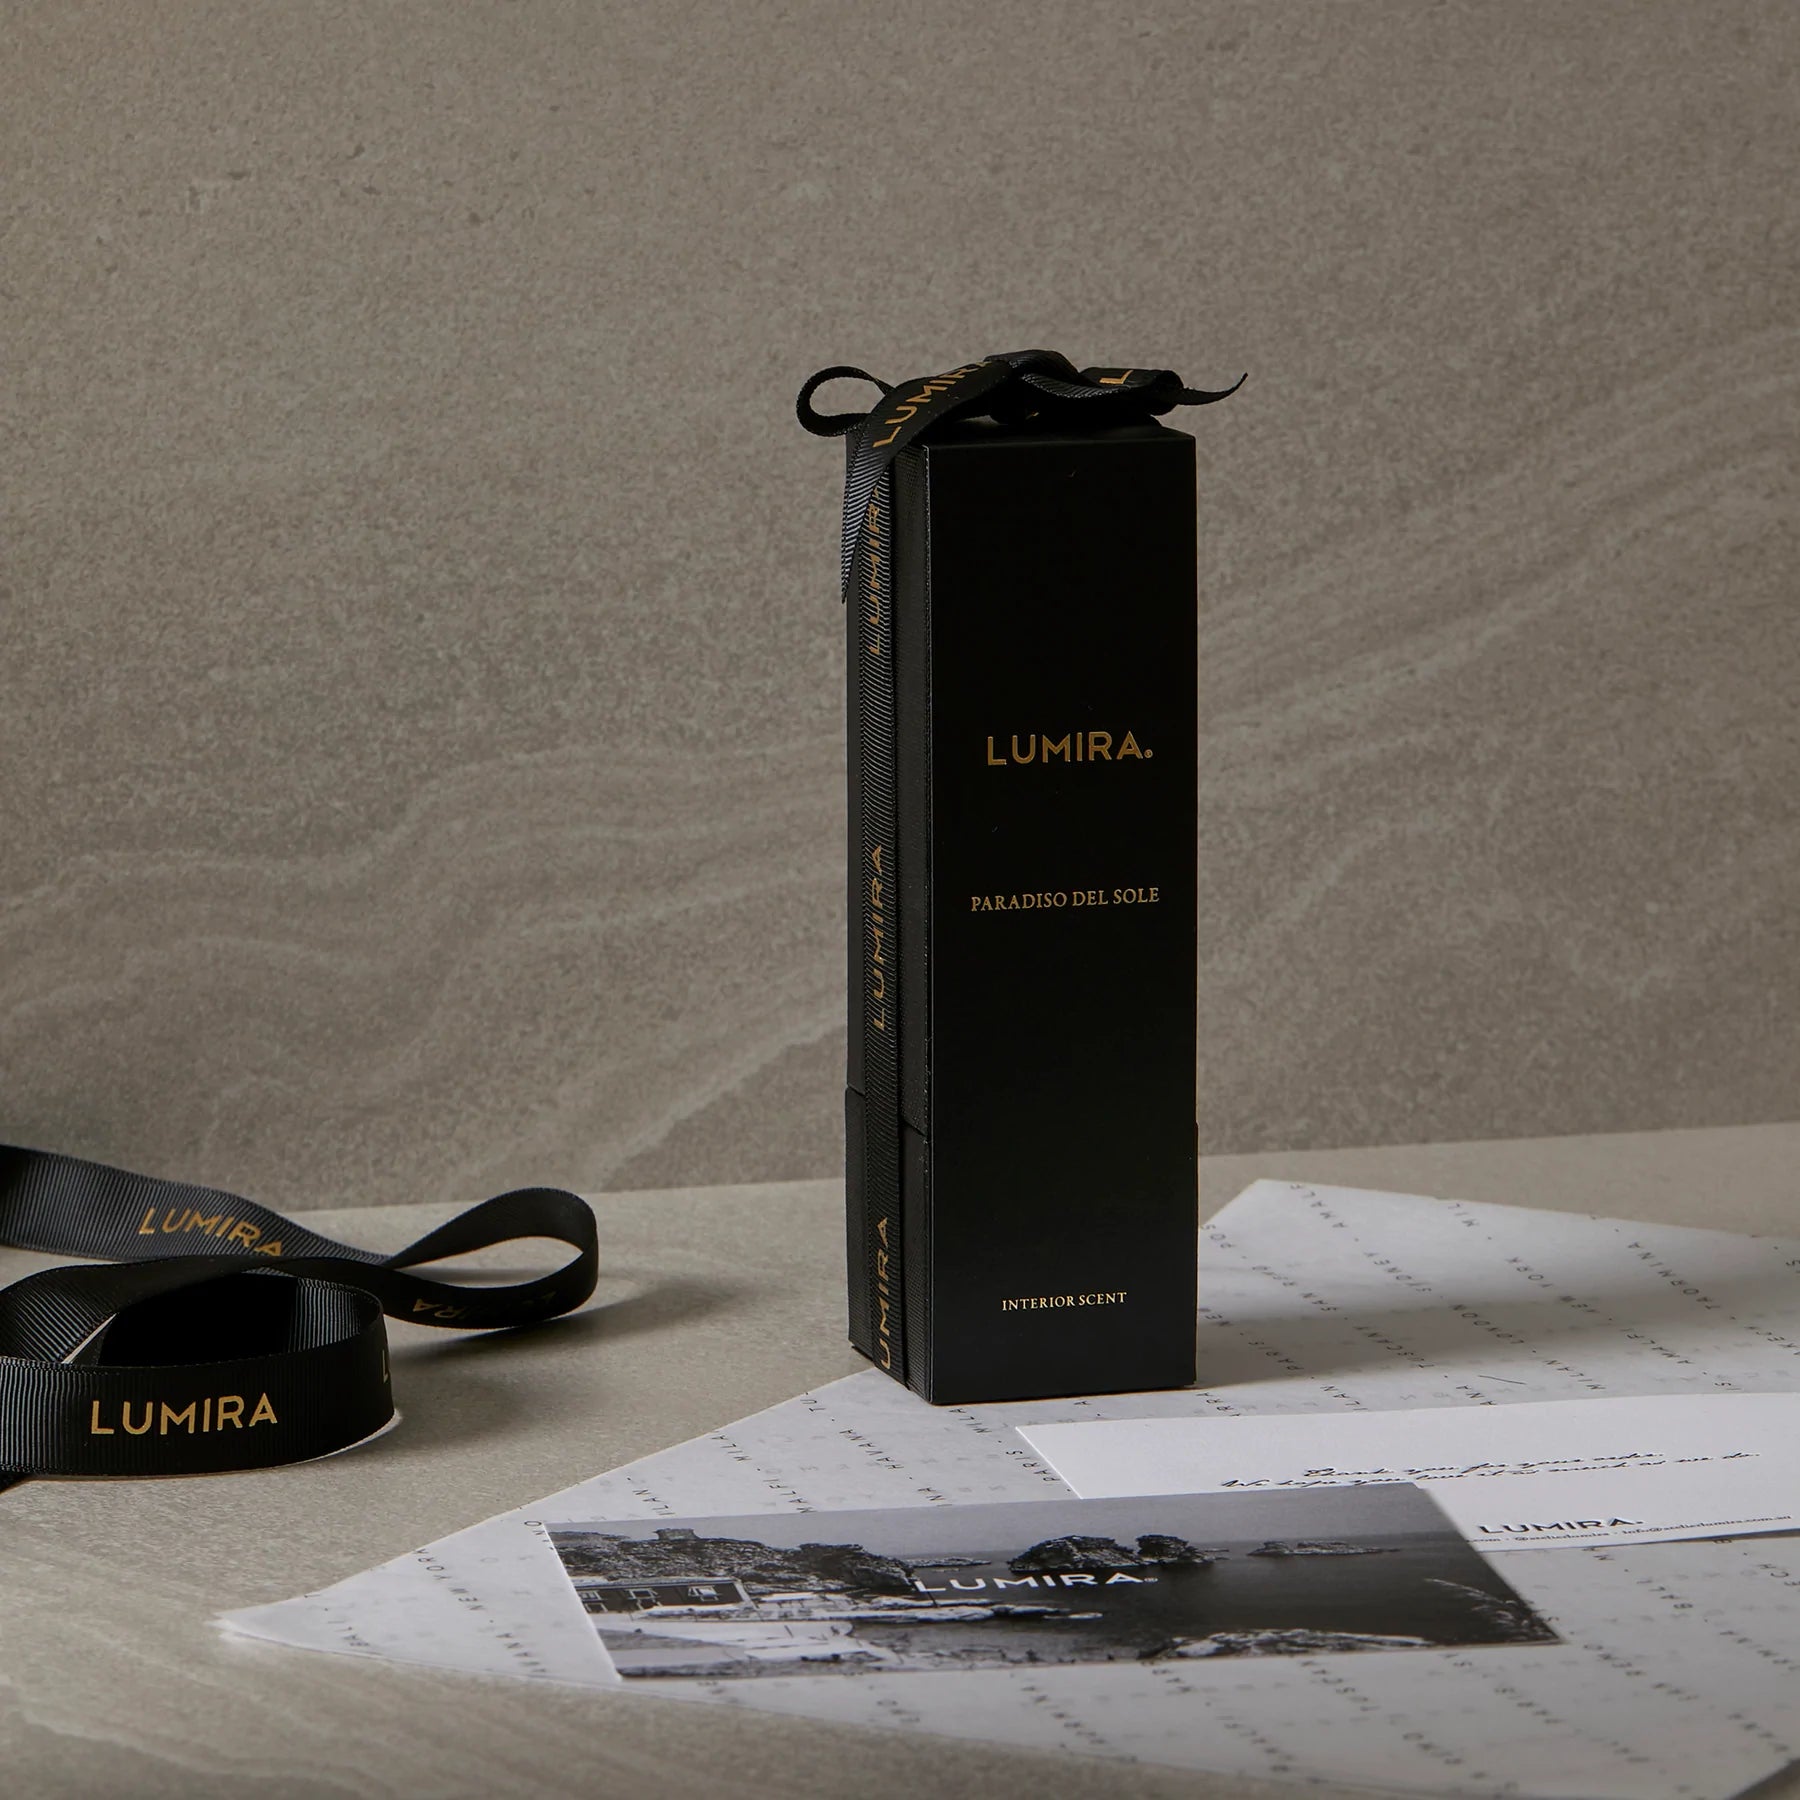 Image of a Lumira room spray from Terra Cruda's home fragrance collection